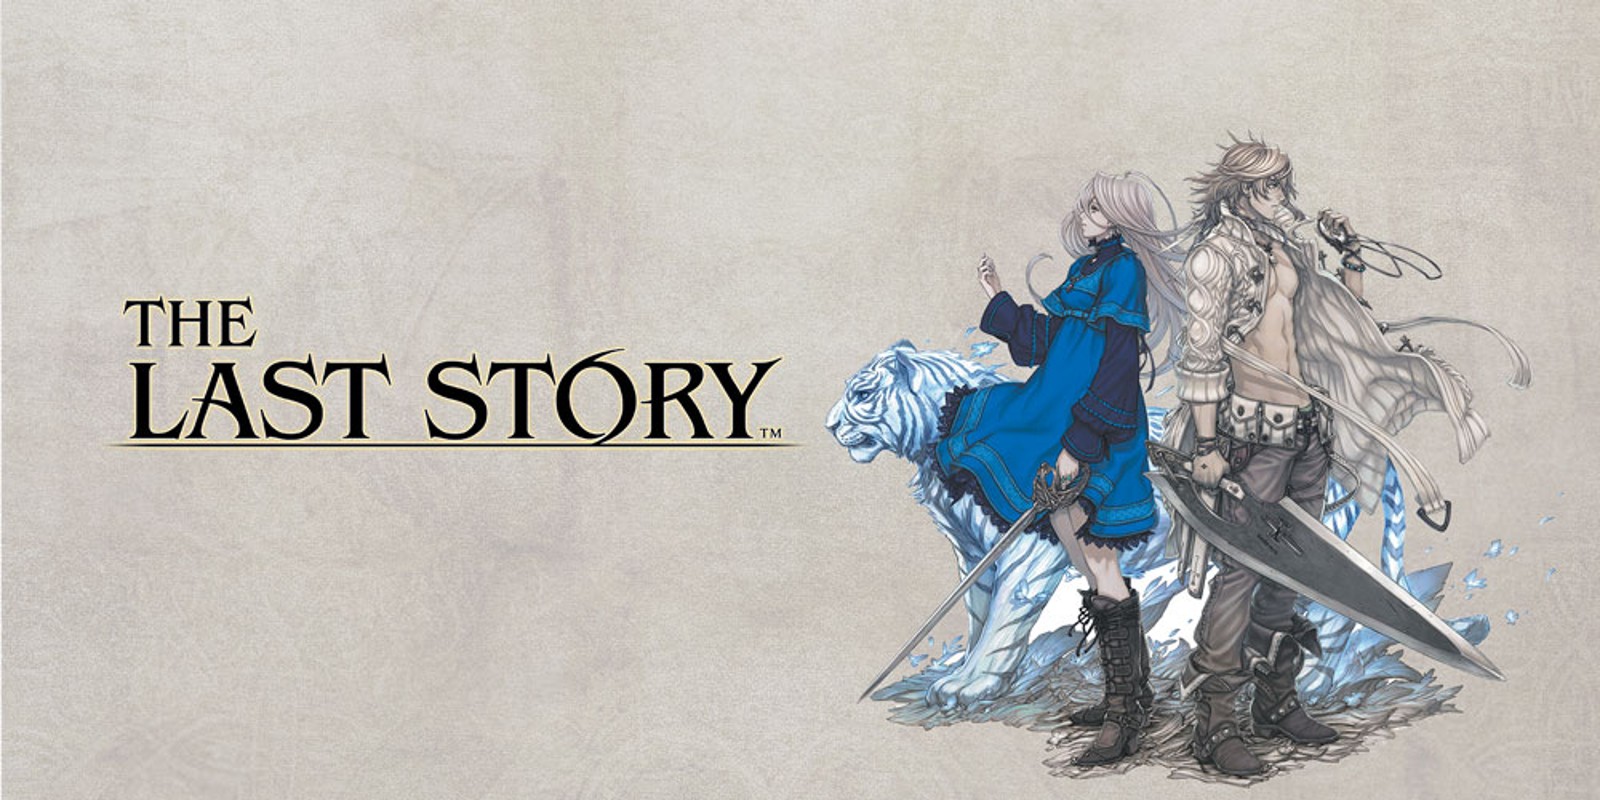 wii the last story